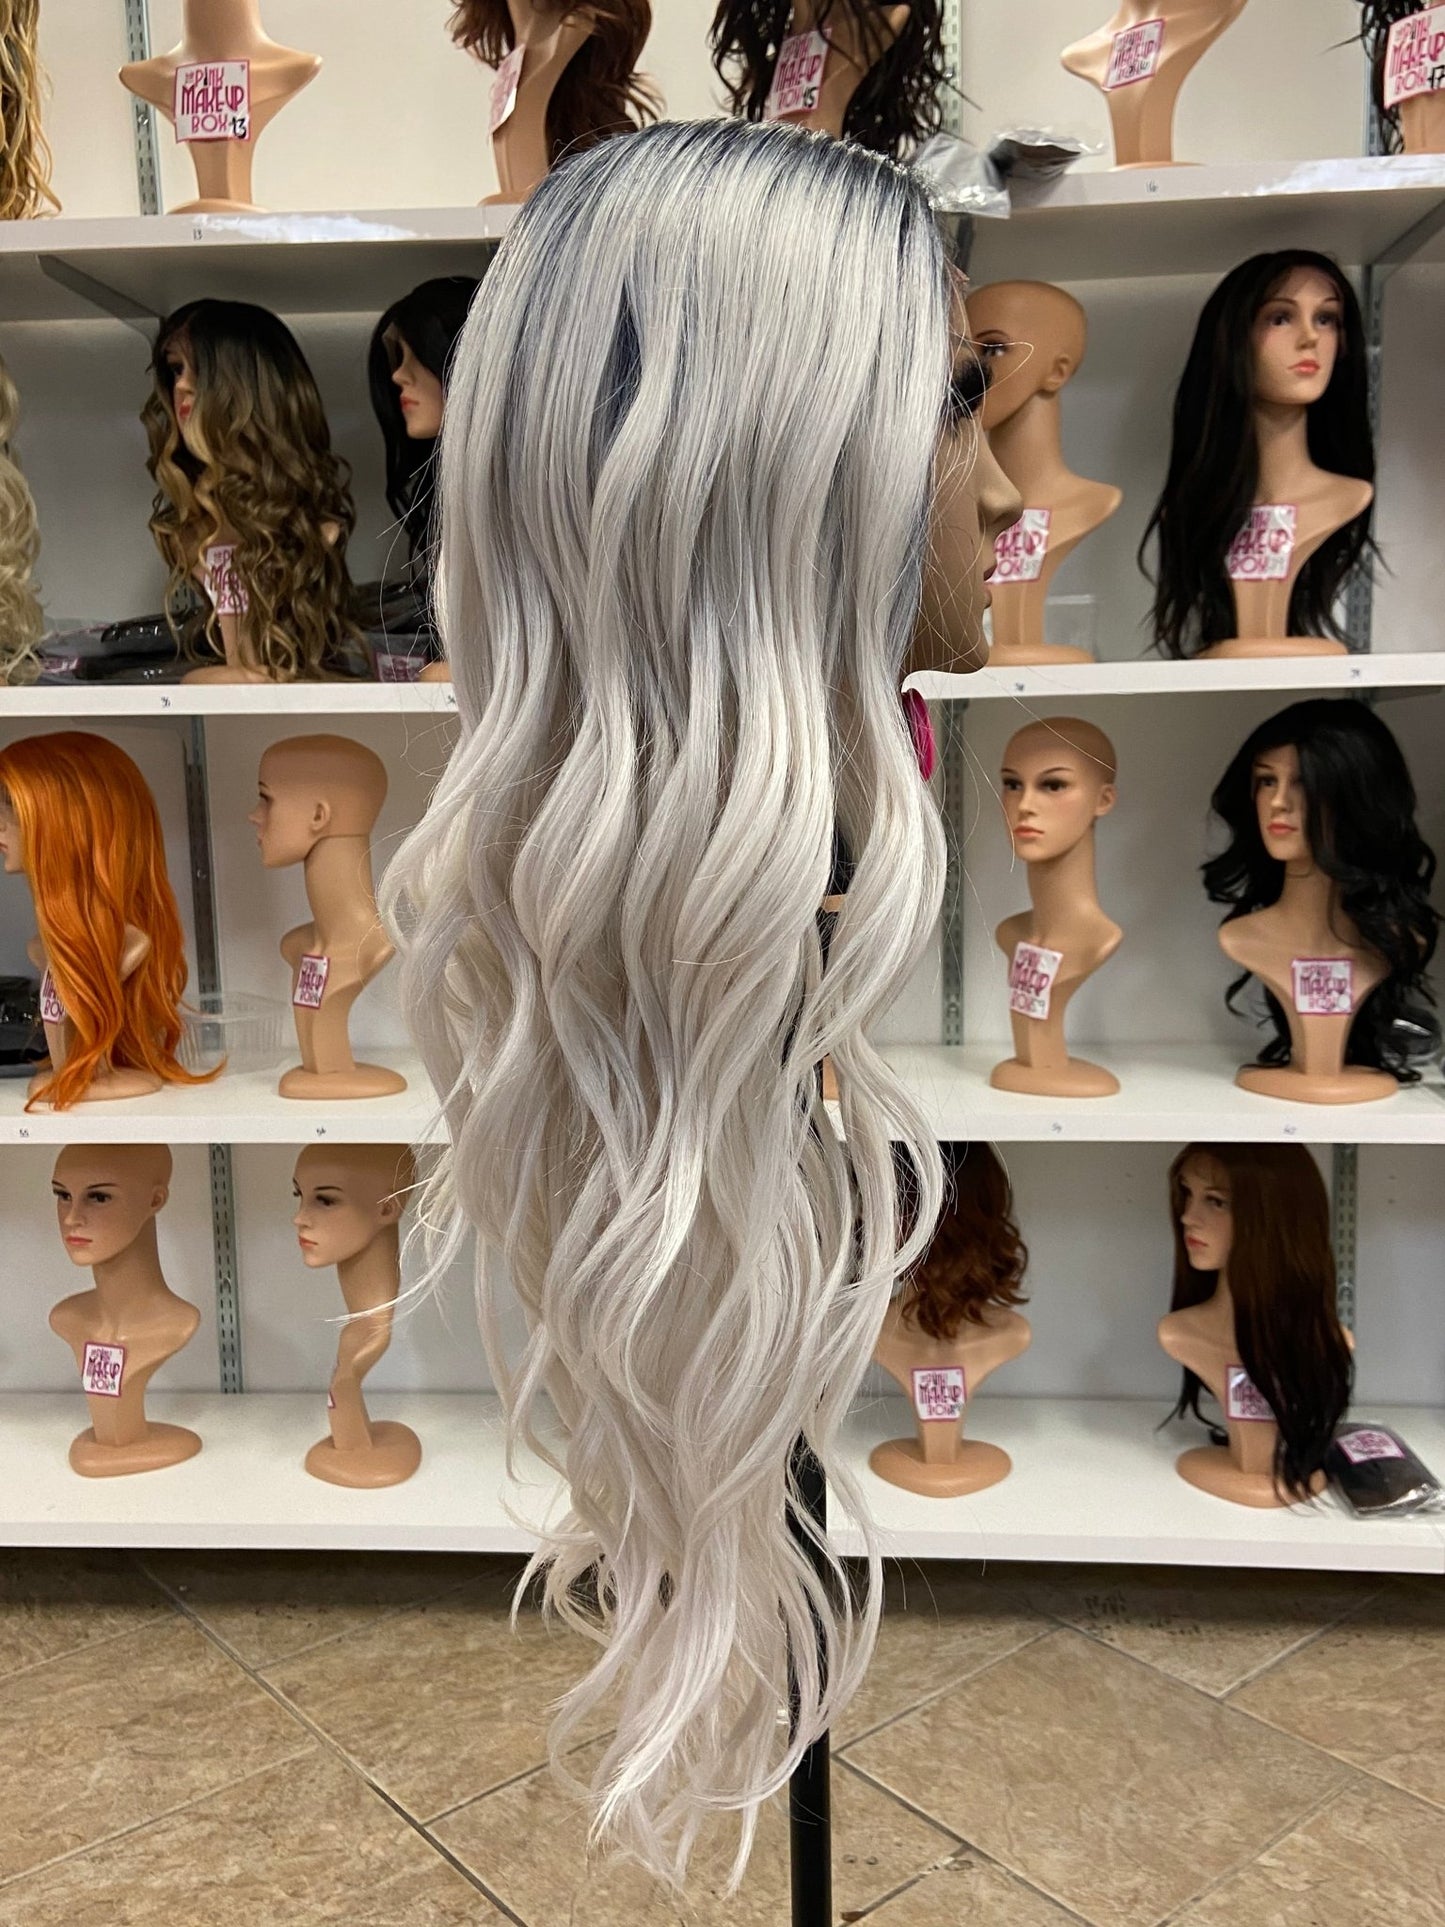 245 Nadia - Middle Part Lace Front Wig Human Hair Blend-1B.GREY - DaizyKat Cosmetics 245 Nadia - Middle Part Lace Front Wig Human Hair Blend-1B.GREY DaizyKat Cosmetics